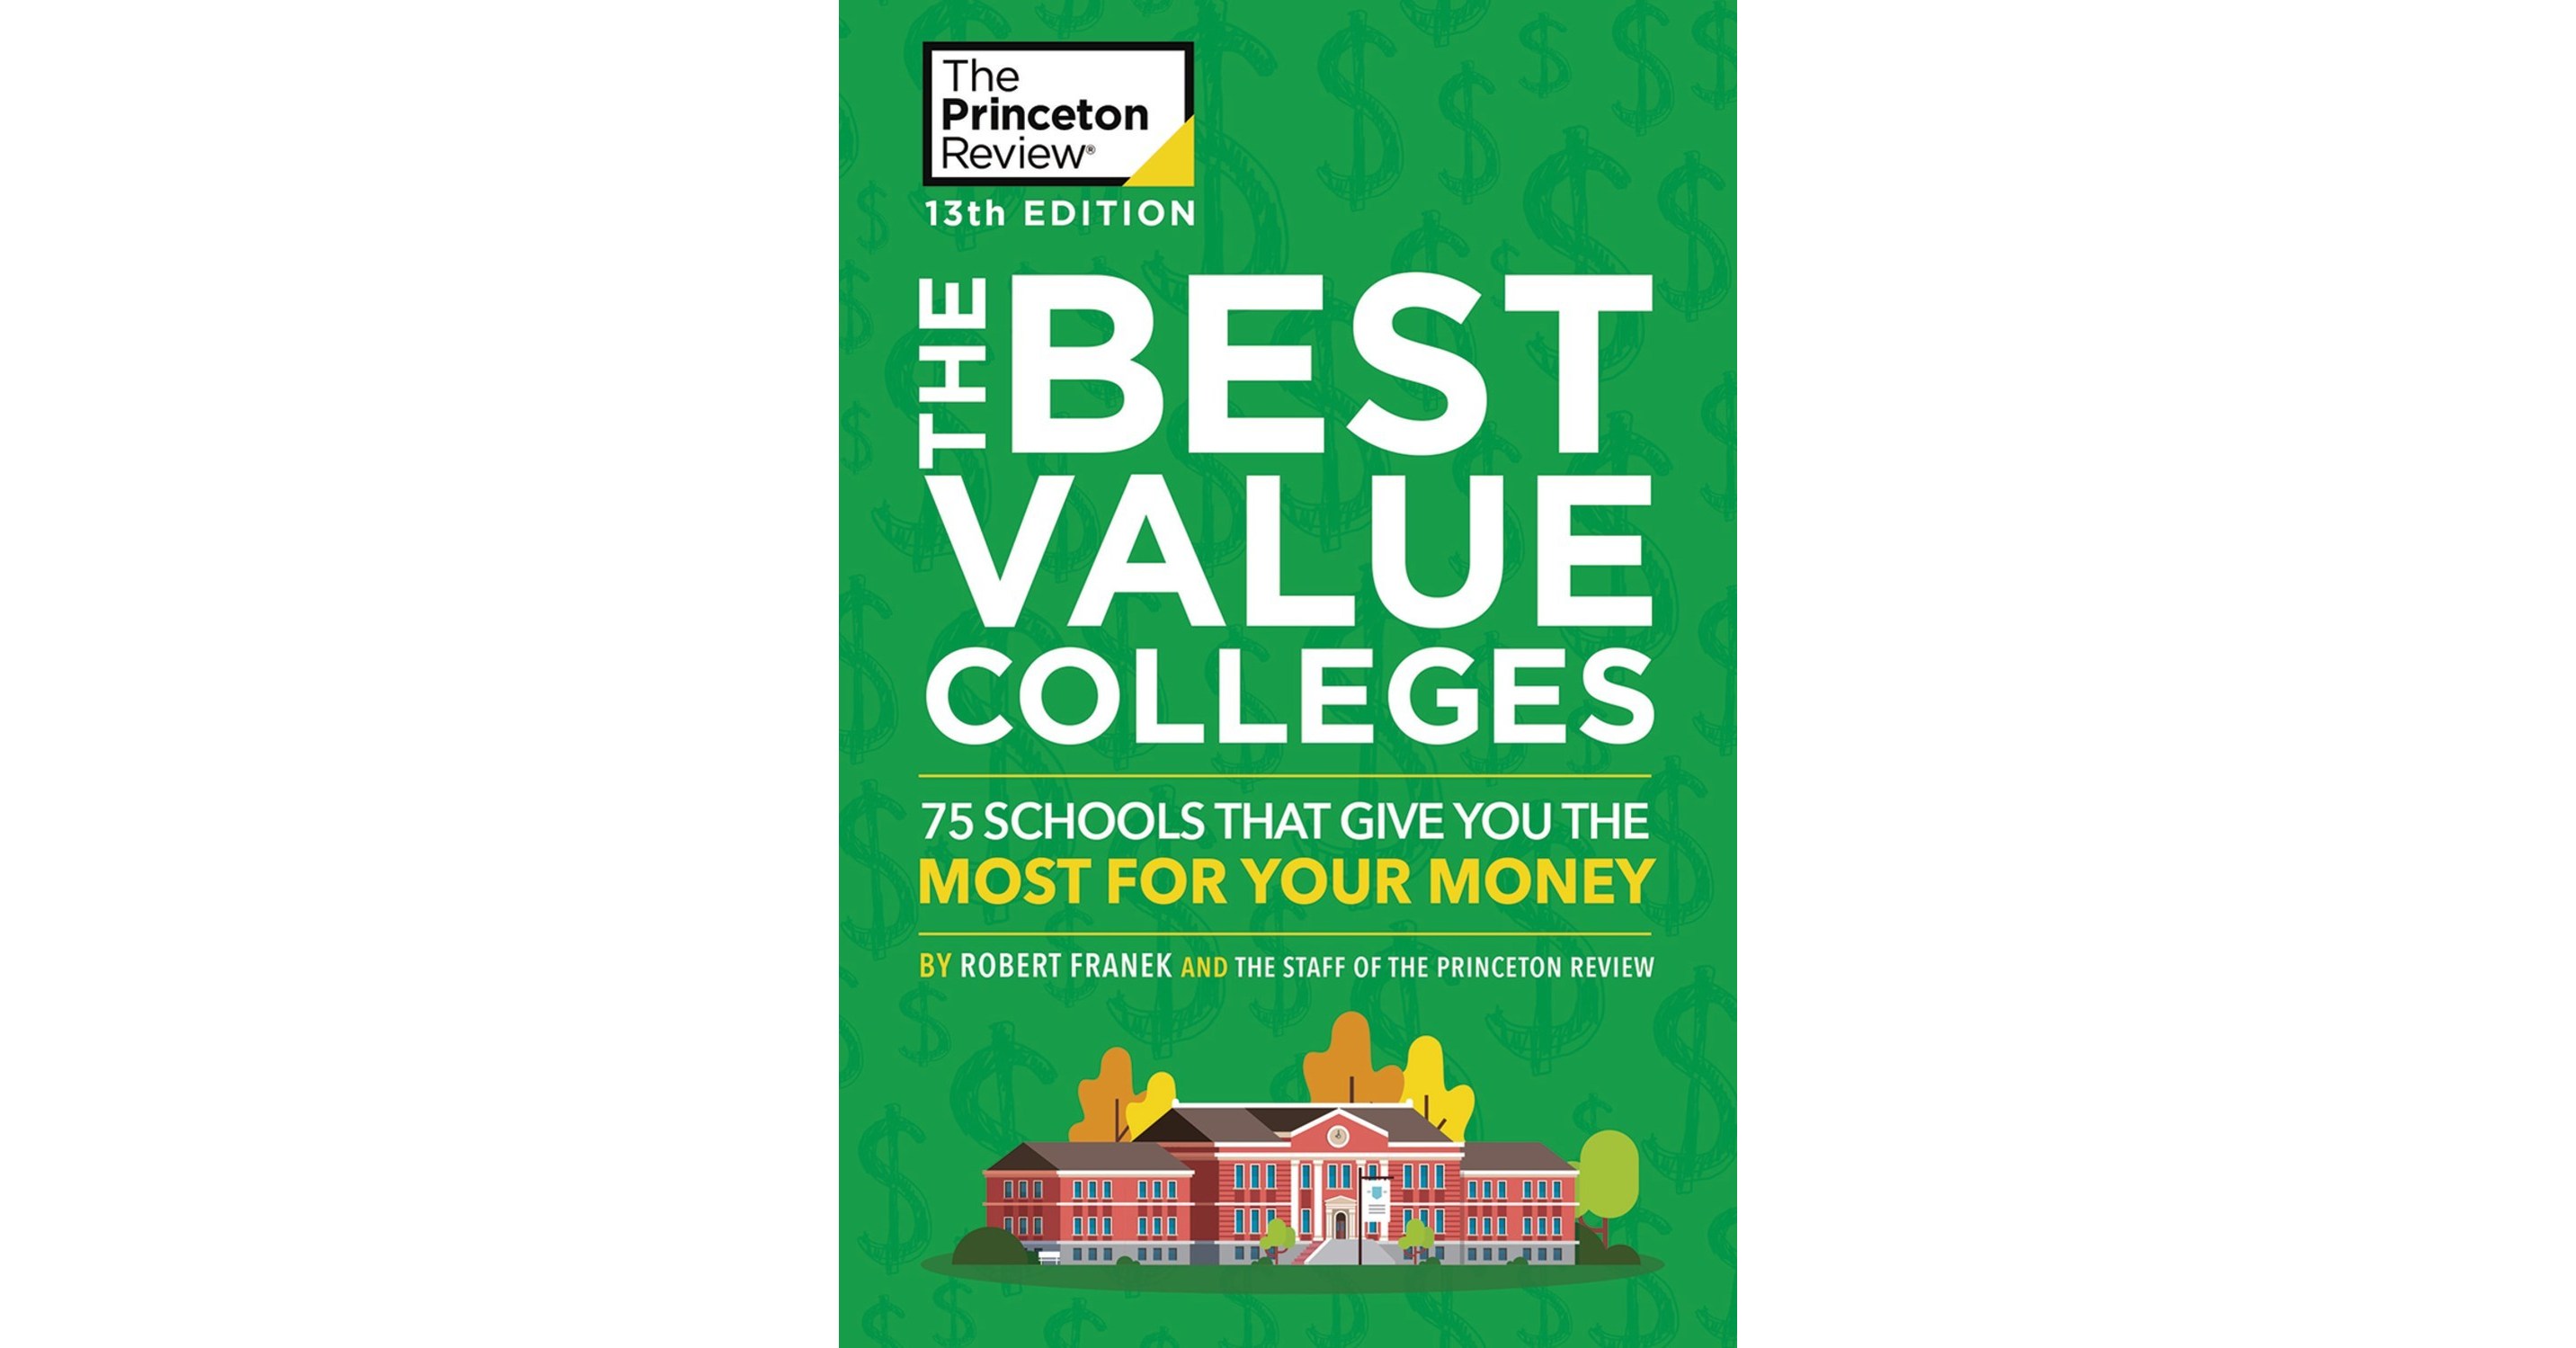 the-princeton-review-has-released-its-best-value-colleges-list-and-rankings-for-2020